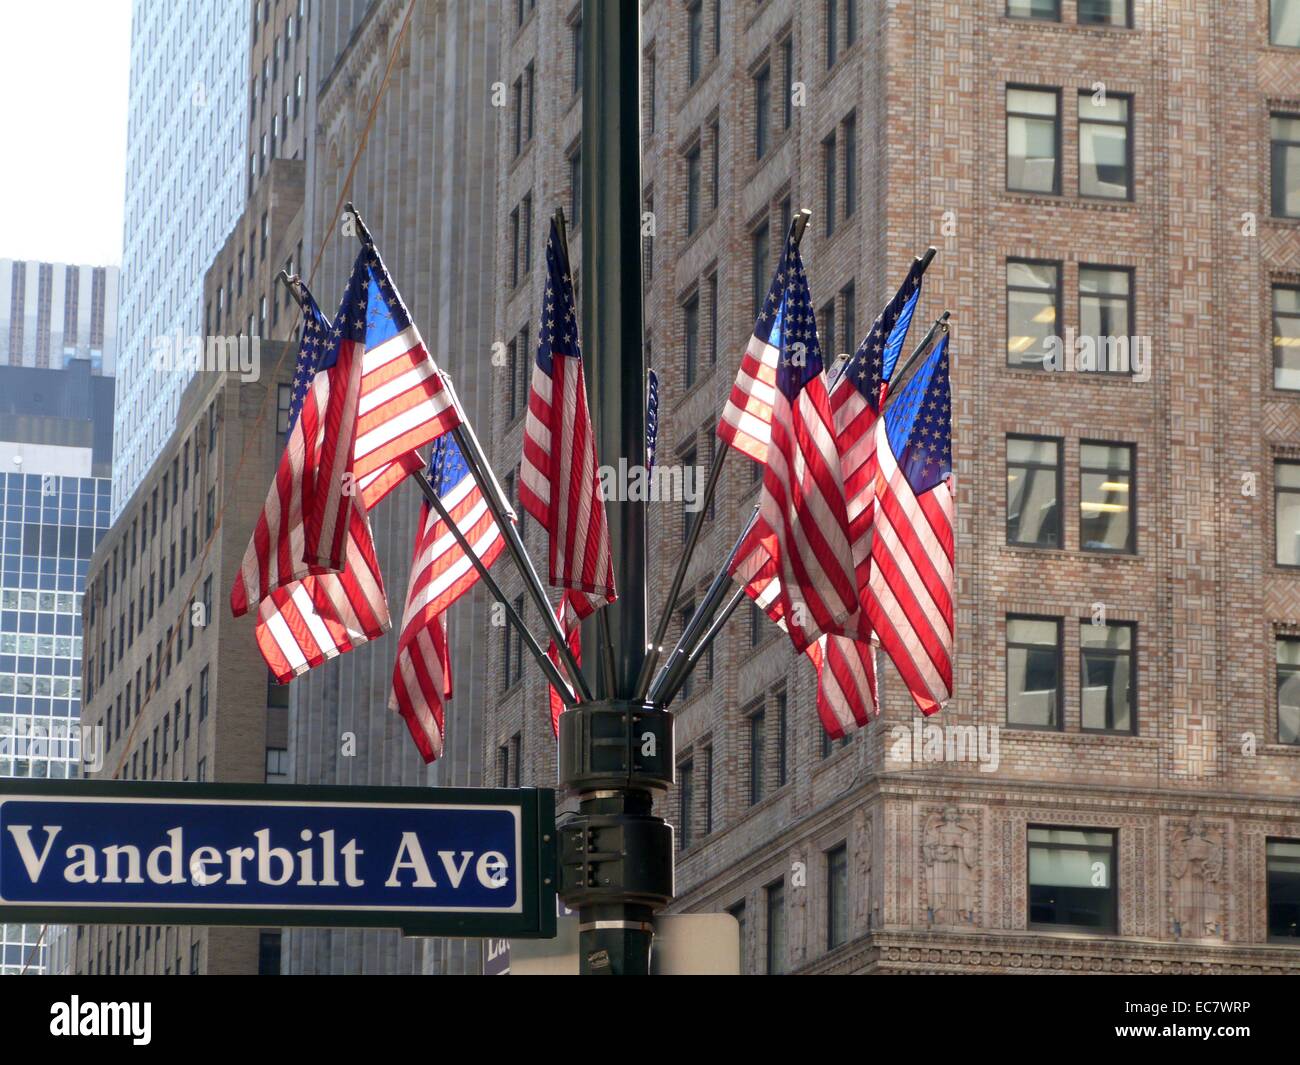 American flags decorate a lamppost at the Vanderbilt Avenue at midtown New York City. 2014 Stock Photo